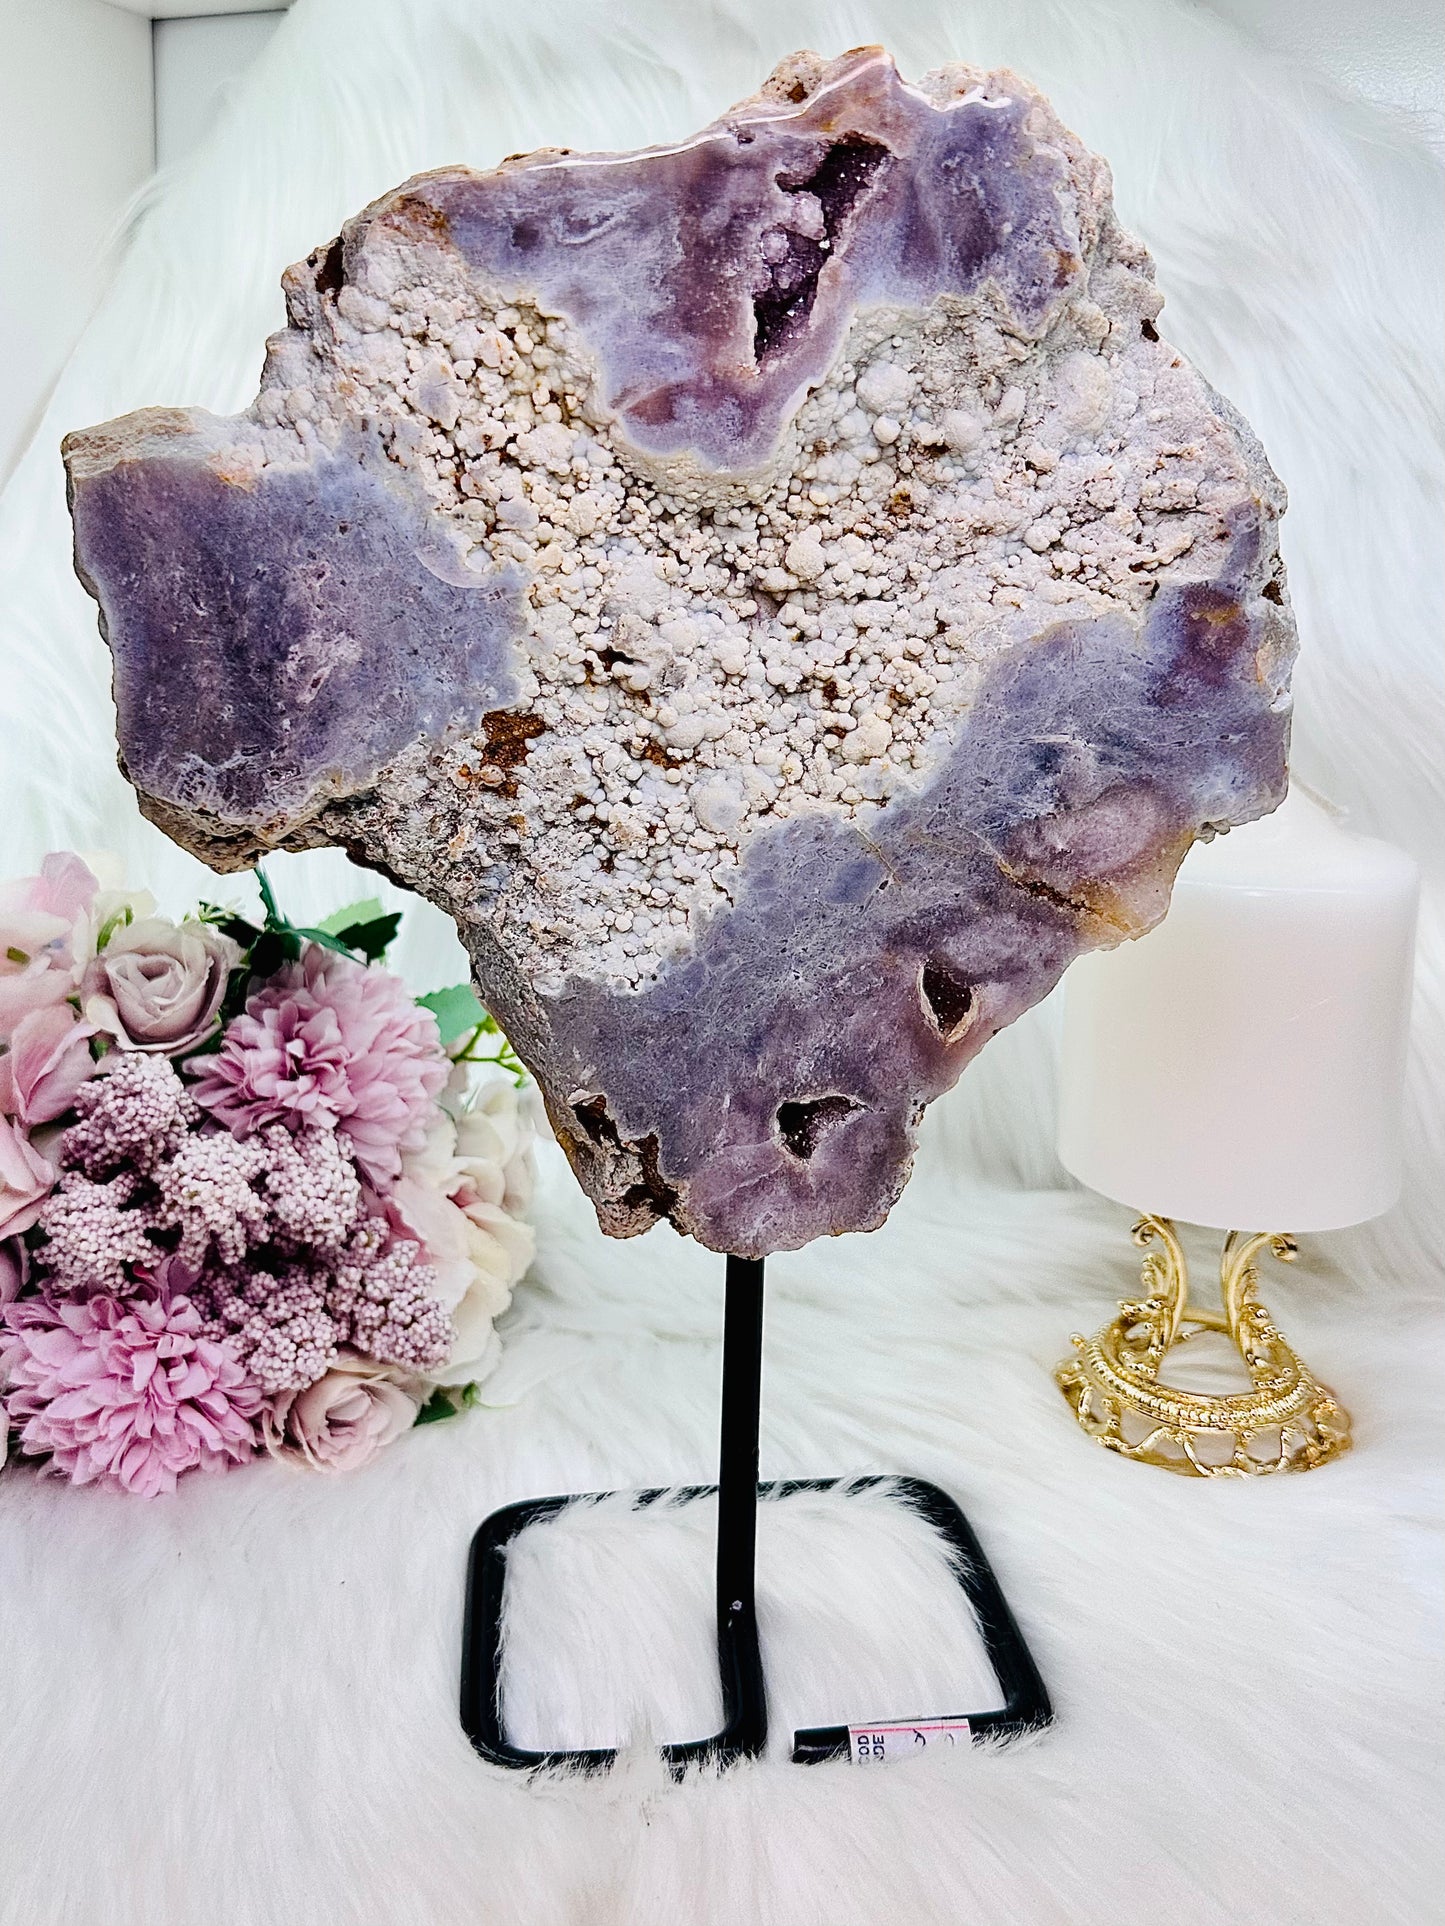 Classy & Absolutely Fabulous Huge 1.68KG Druzy Pink Amethyst Chunky Slab On Stand From
Brazil ~ A Truly Magnificent Piece